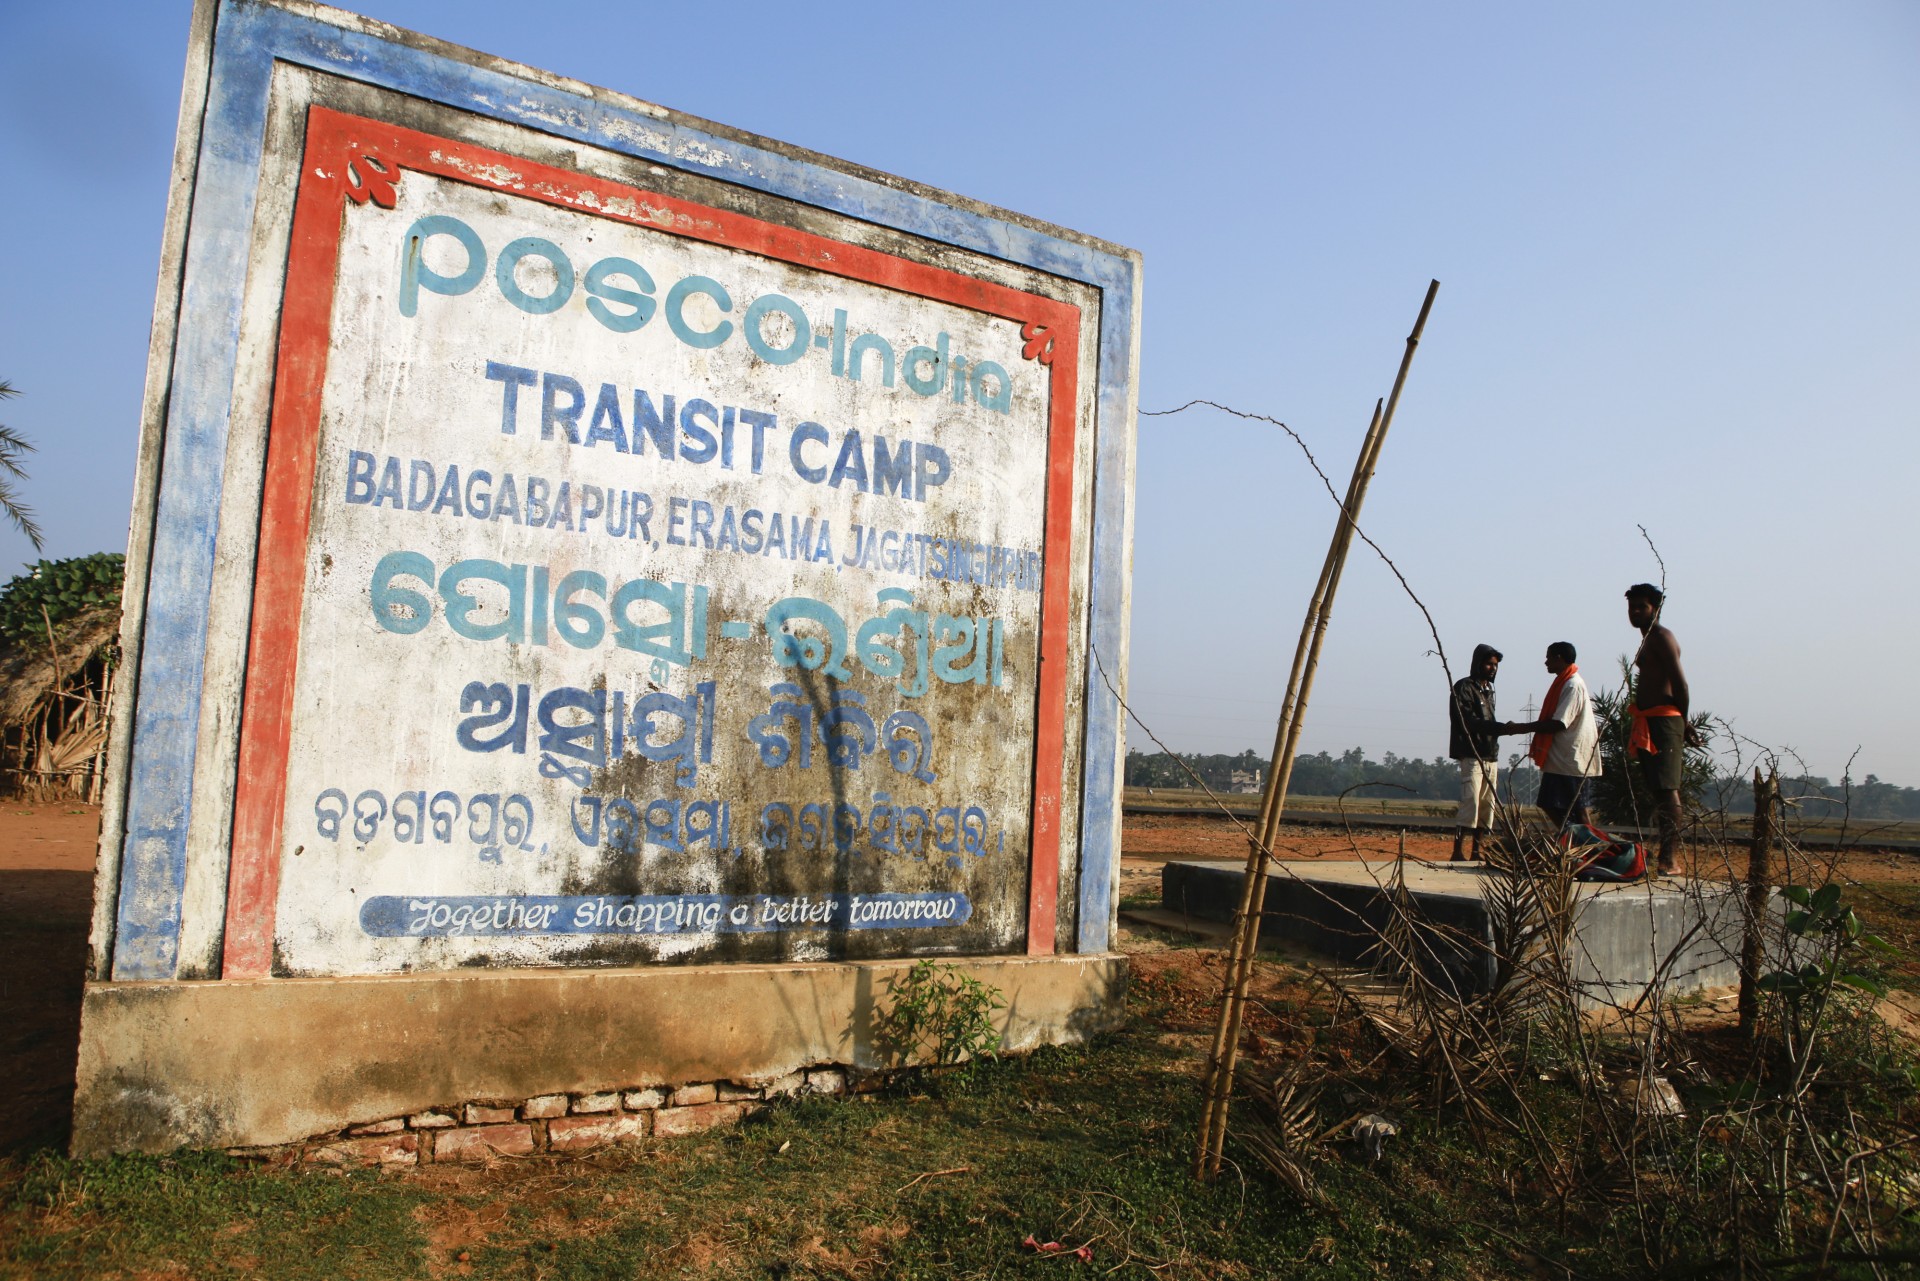 Signage for the Posco India Transit Camp, where families relocated from the site of a proposed Posco steel plant have been provided temporary shelter, stands in Badagabapur, Odisha, India, on Sunday, Jan. 19, 2014. Posco may soon start construction on a $12 billion steel complex in India first proposed in 2005 as Prime Minister Manmohan Singh speeds up the approval process for the nations biggest foreign investment. 
Foto: Prashanth Vishwanathan/Bloomberg via Getty Images